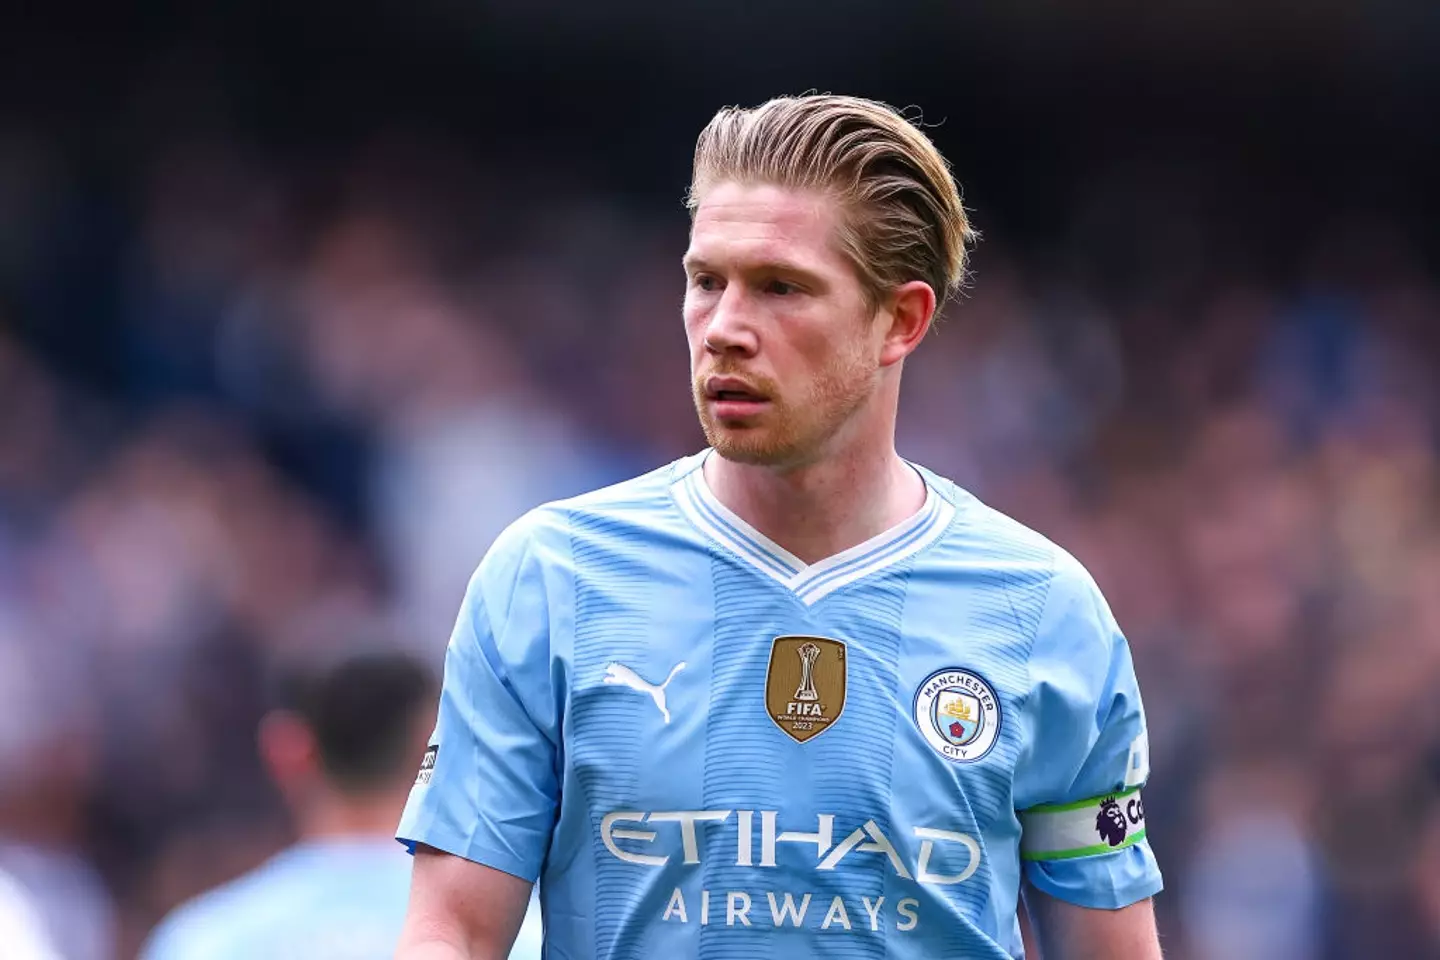 Kevin De Bruyne has an usual way of calming his nerves (Image: Getty)